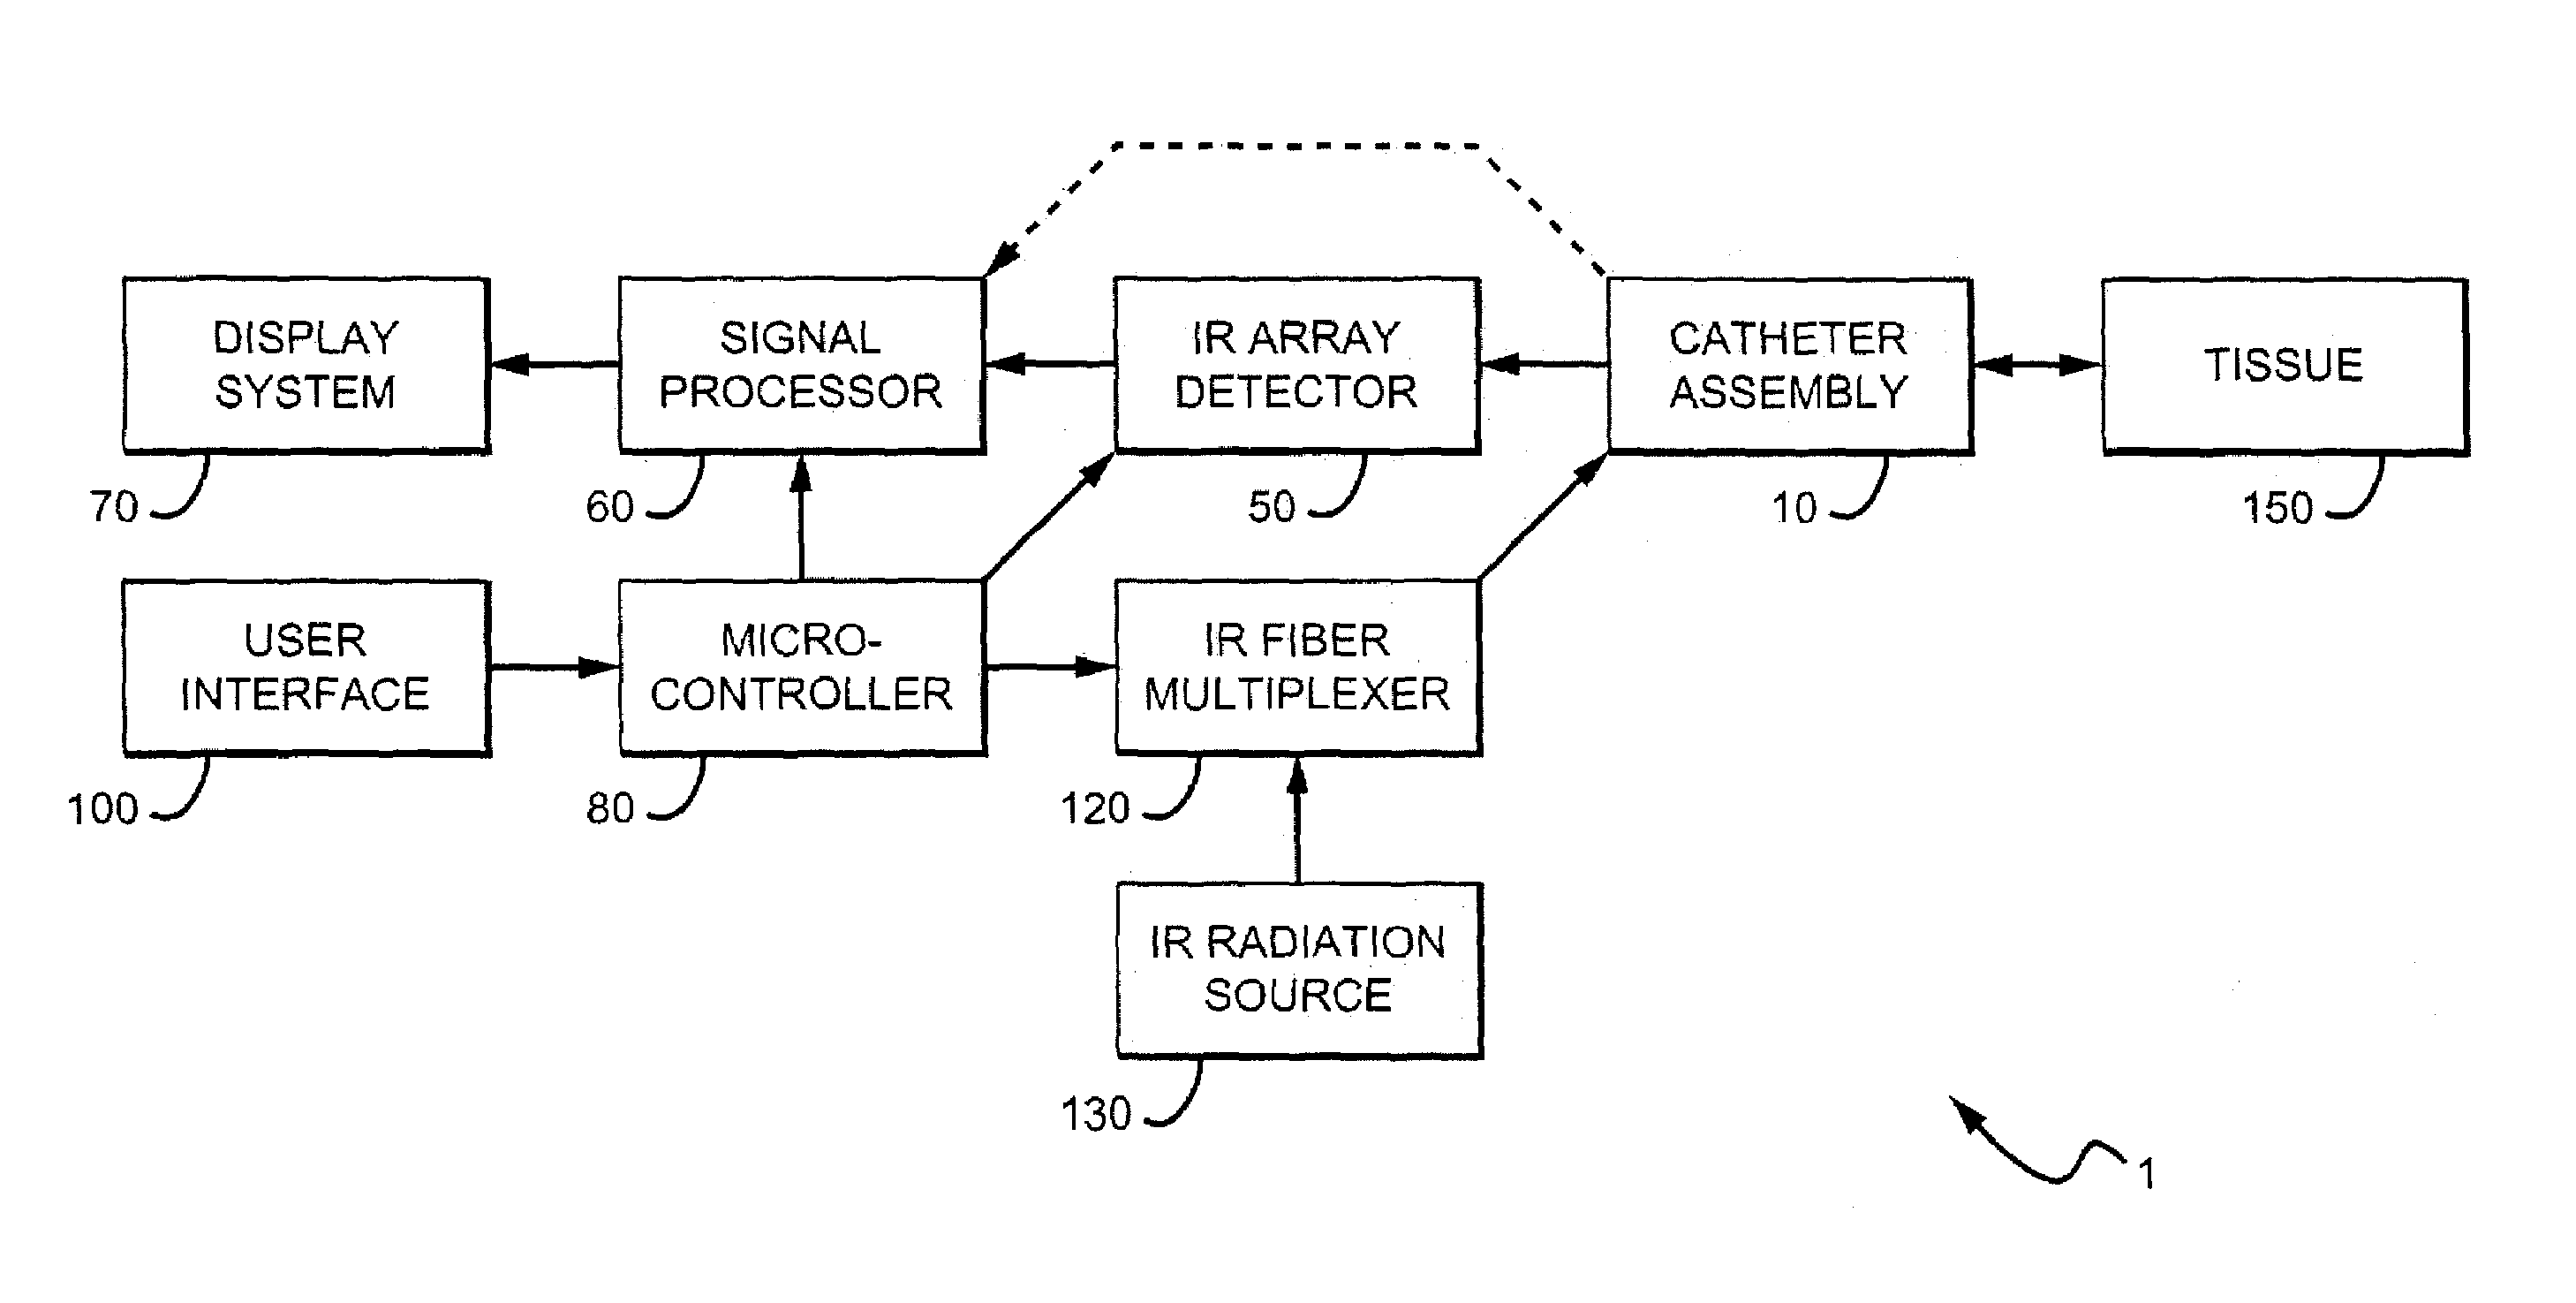 Method and apparatus for detecting vulnerable atherosclerotic plaque